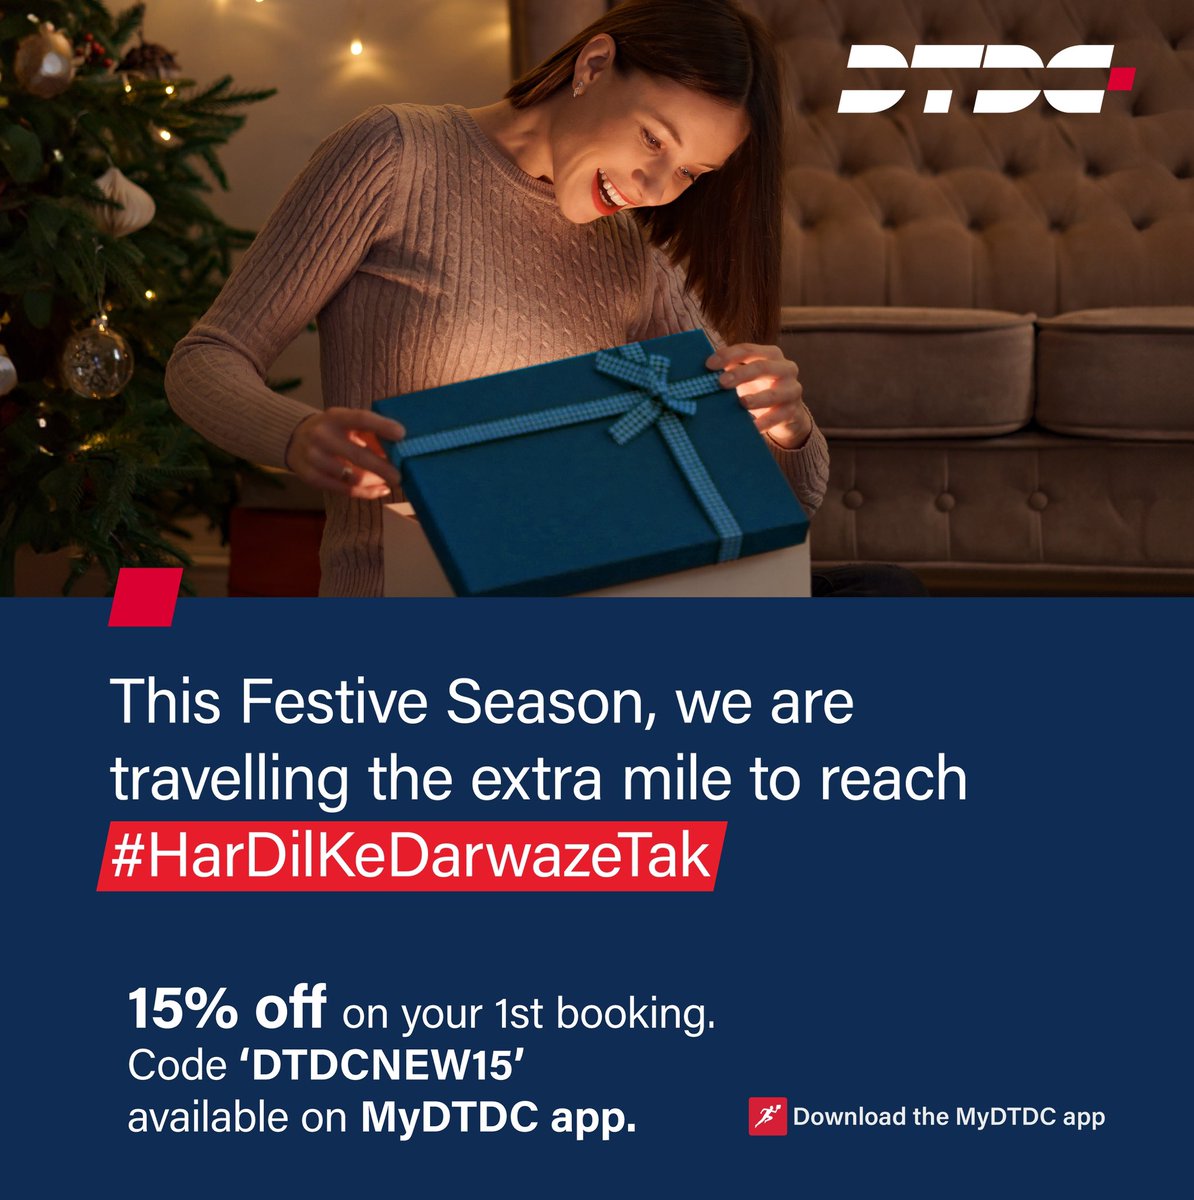 It’s that time of year when DTDC travels the extra miles to bring you closer to your loved ones. 
So, if you're planning to send your warm wishes and gifts across seven seas, use the code 'DTDCNEW15' on the MyDTDC app for a 15% discount on your first booking. 

Download the…